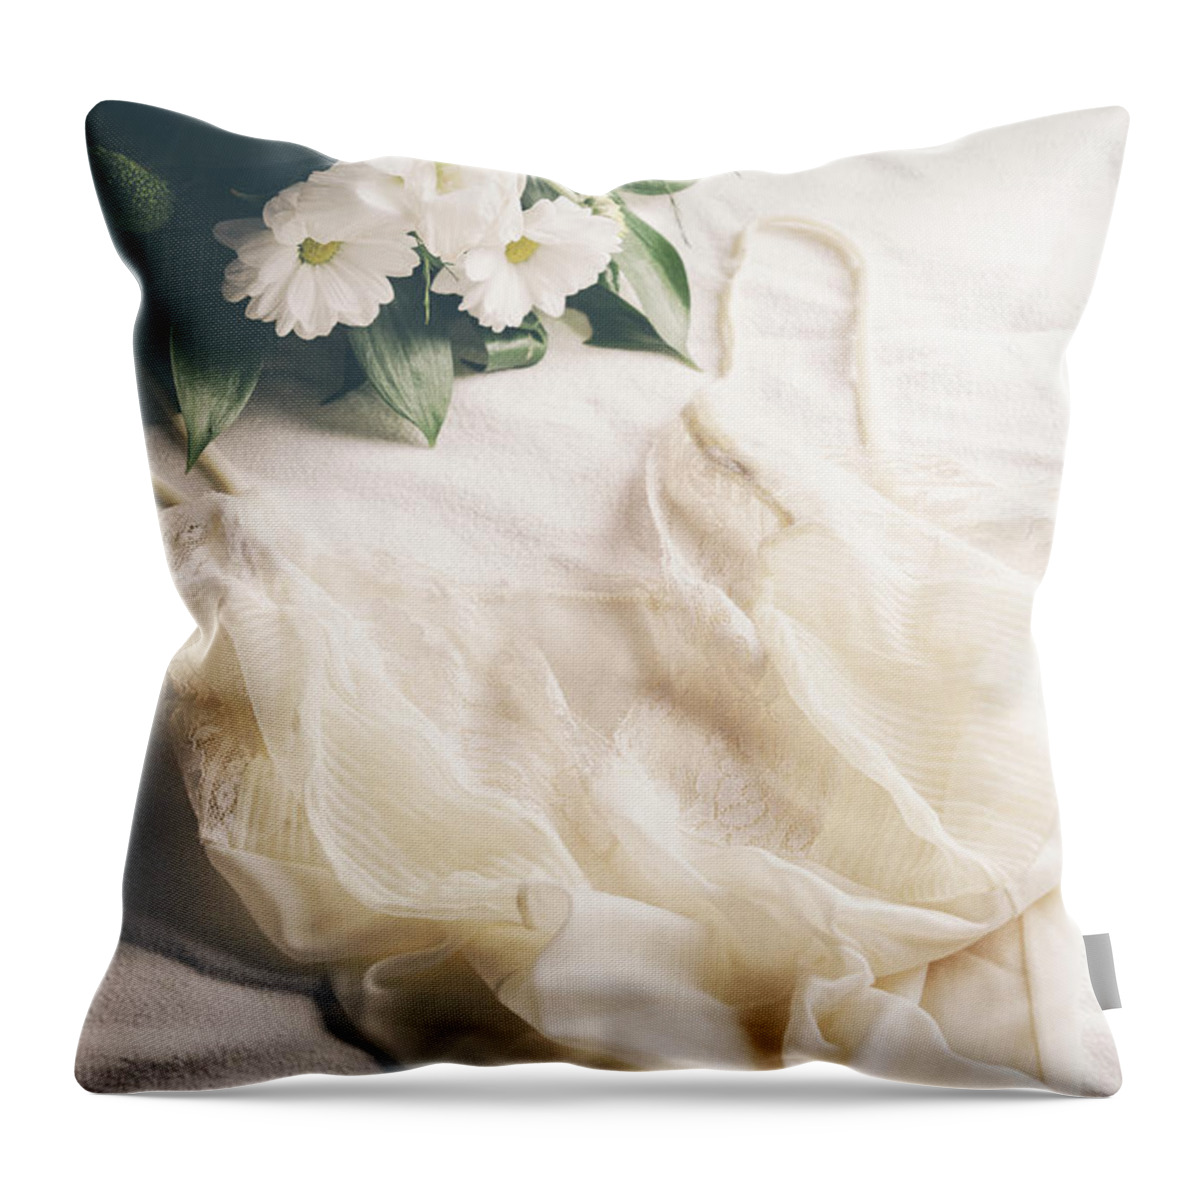 Underwear Throw Pillow featuring the photograph Laced Underwear by Jelena Jovanovic